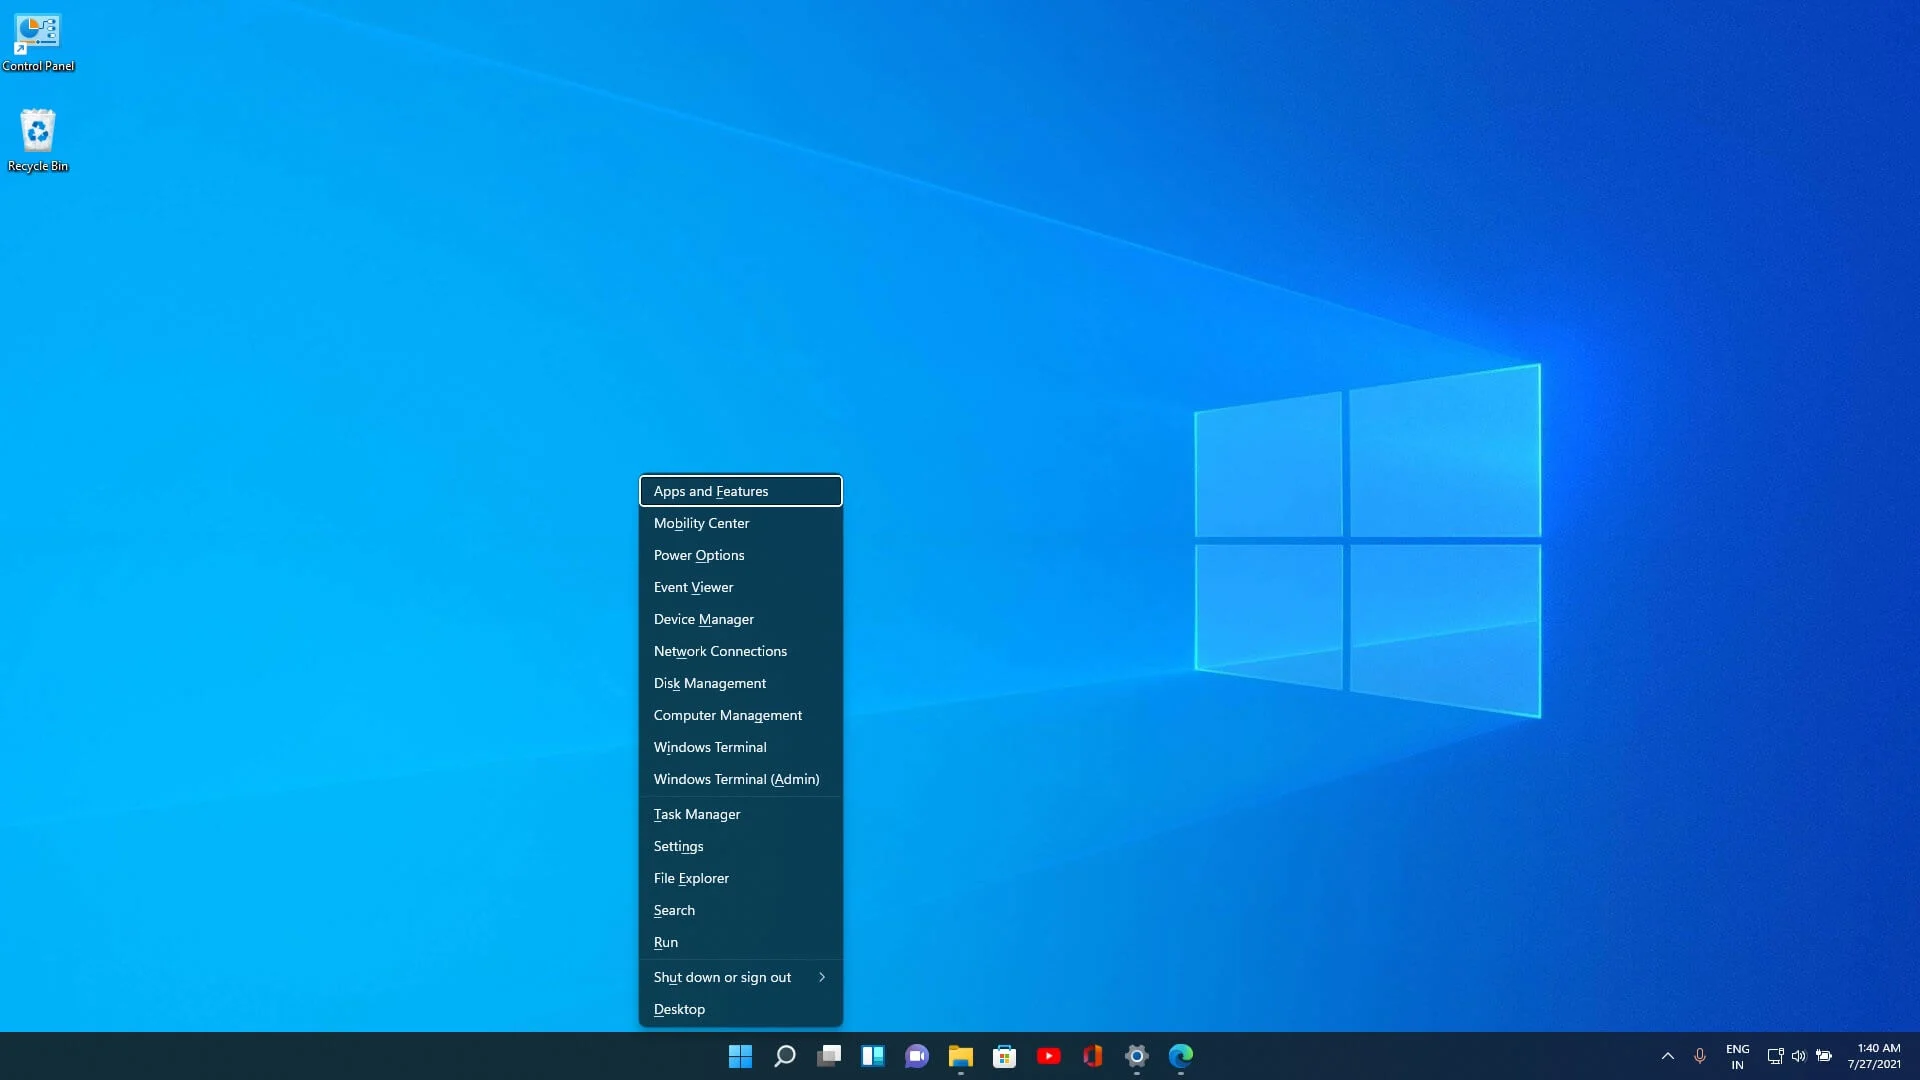 How to Record My Screen on Windows 10?